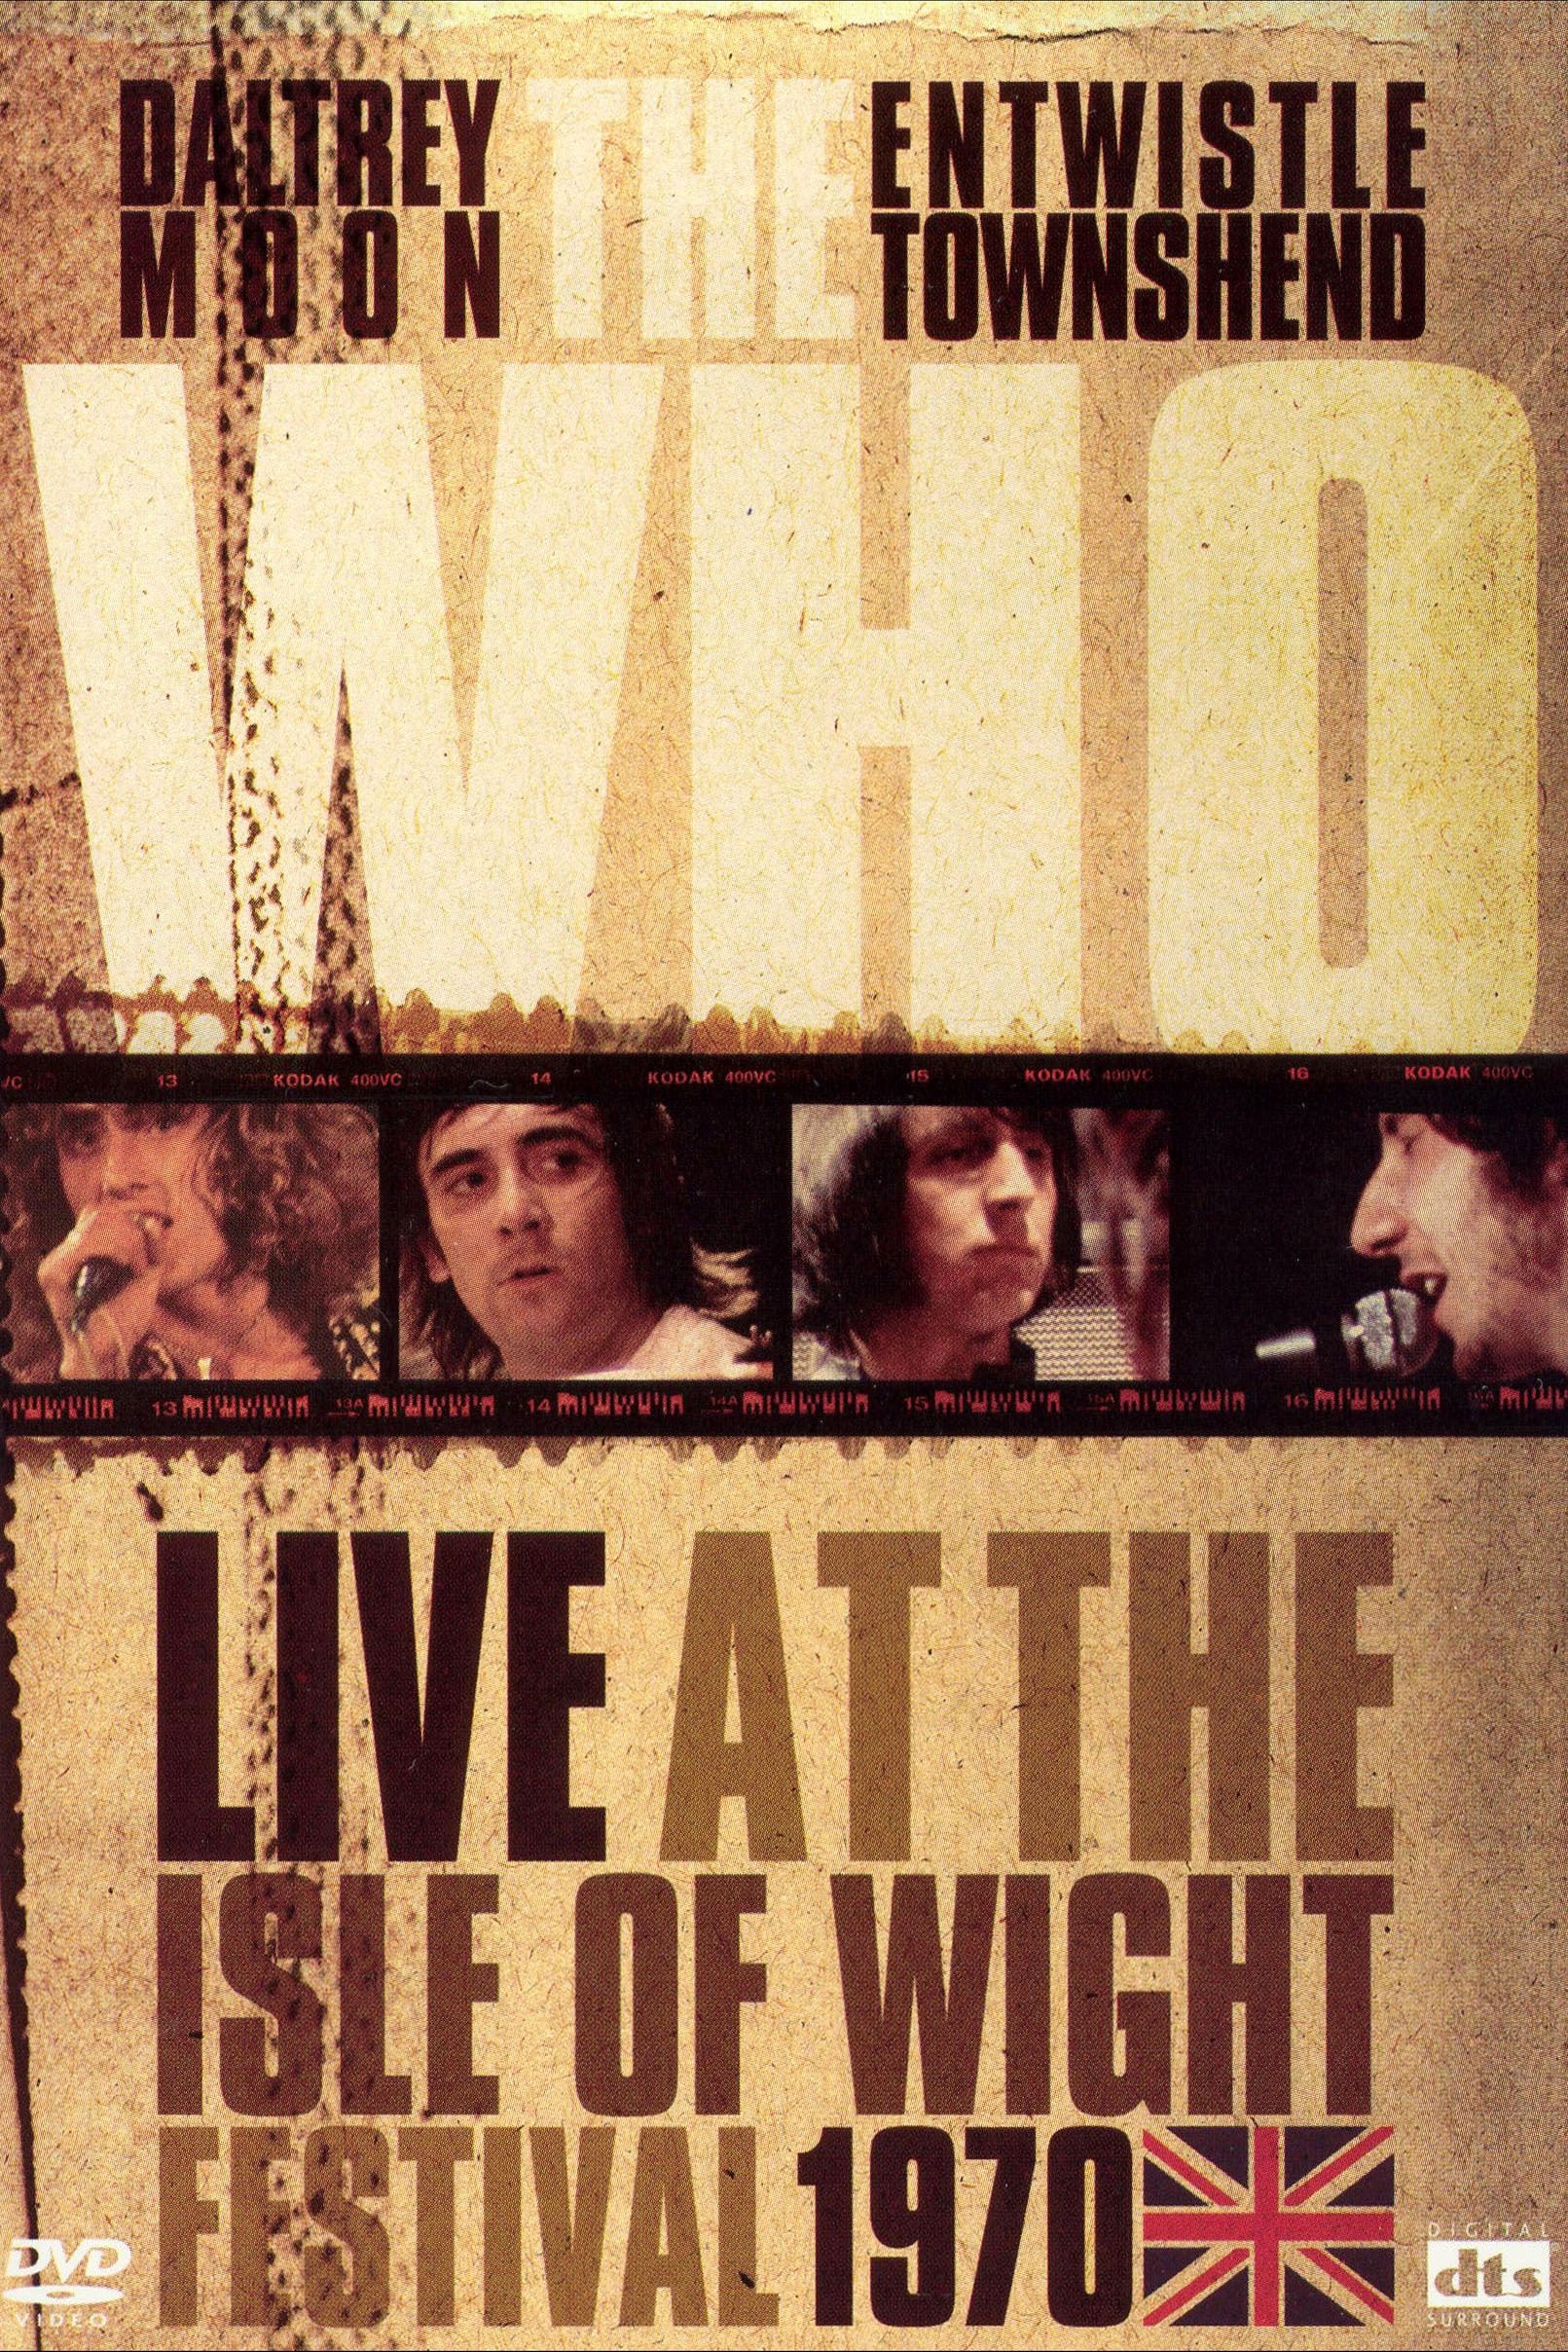 Listening to You: The Who Live at the Isle of Wight